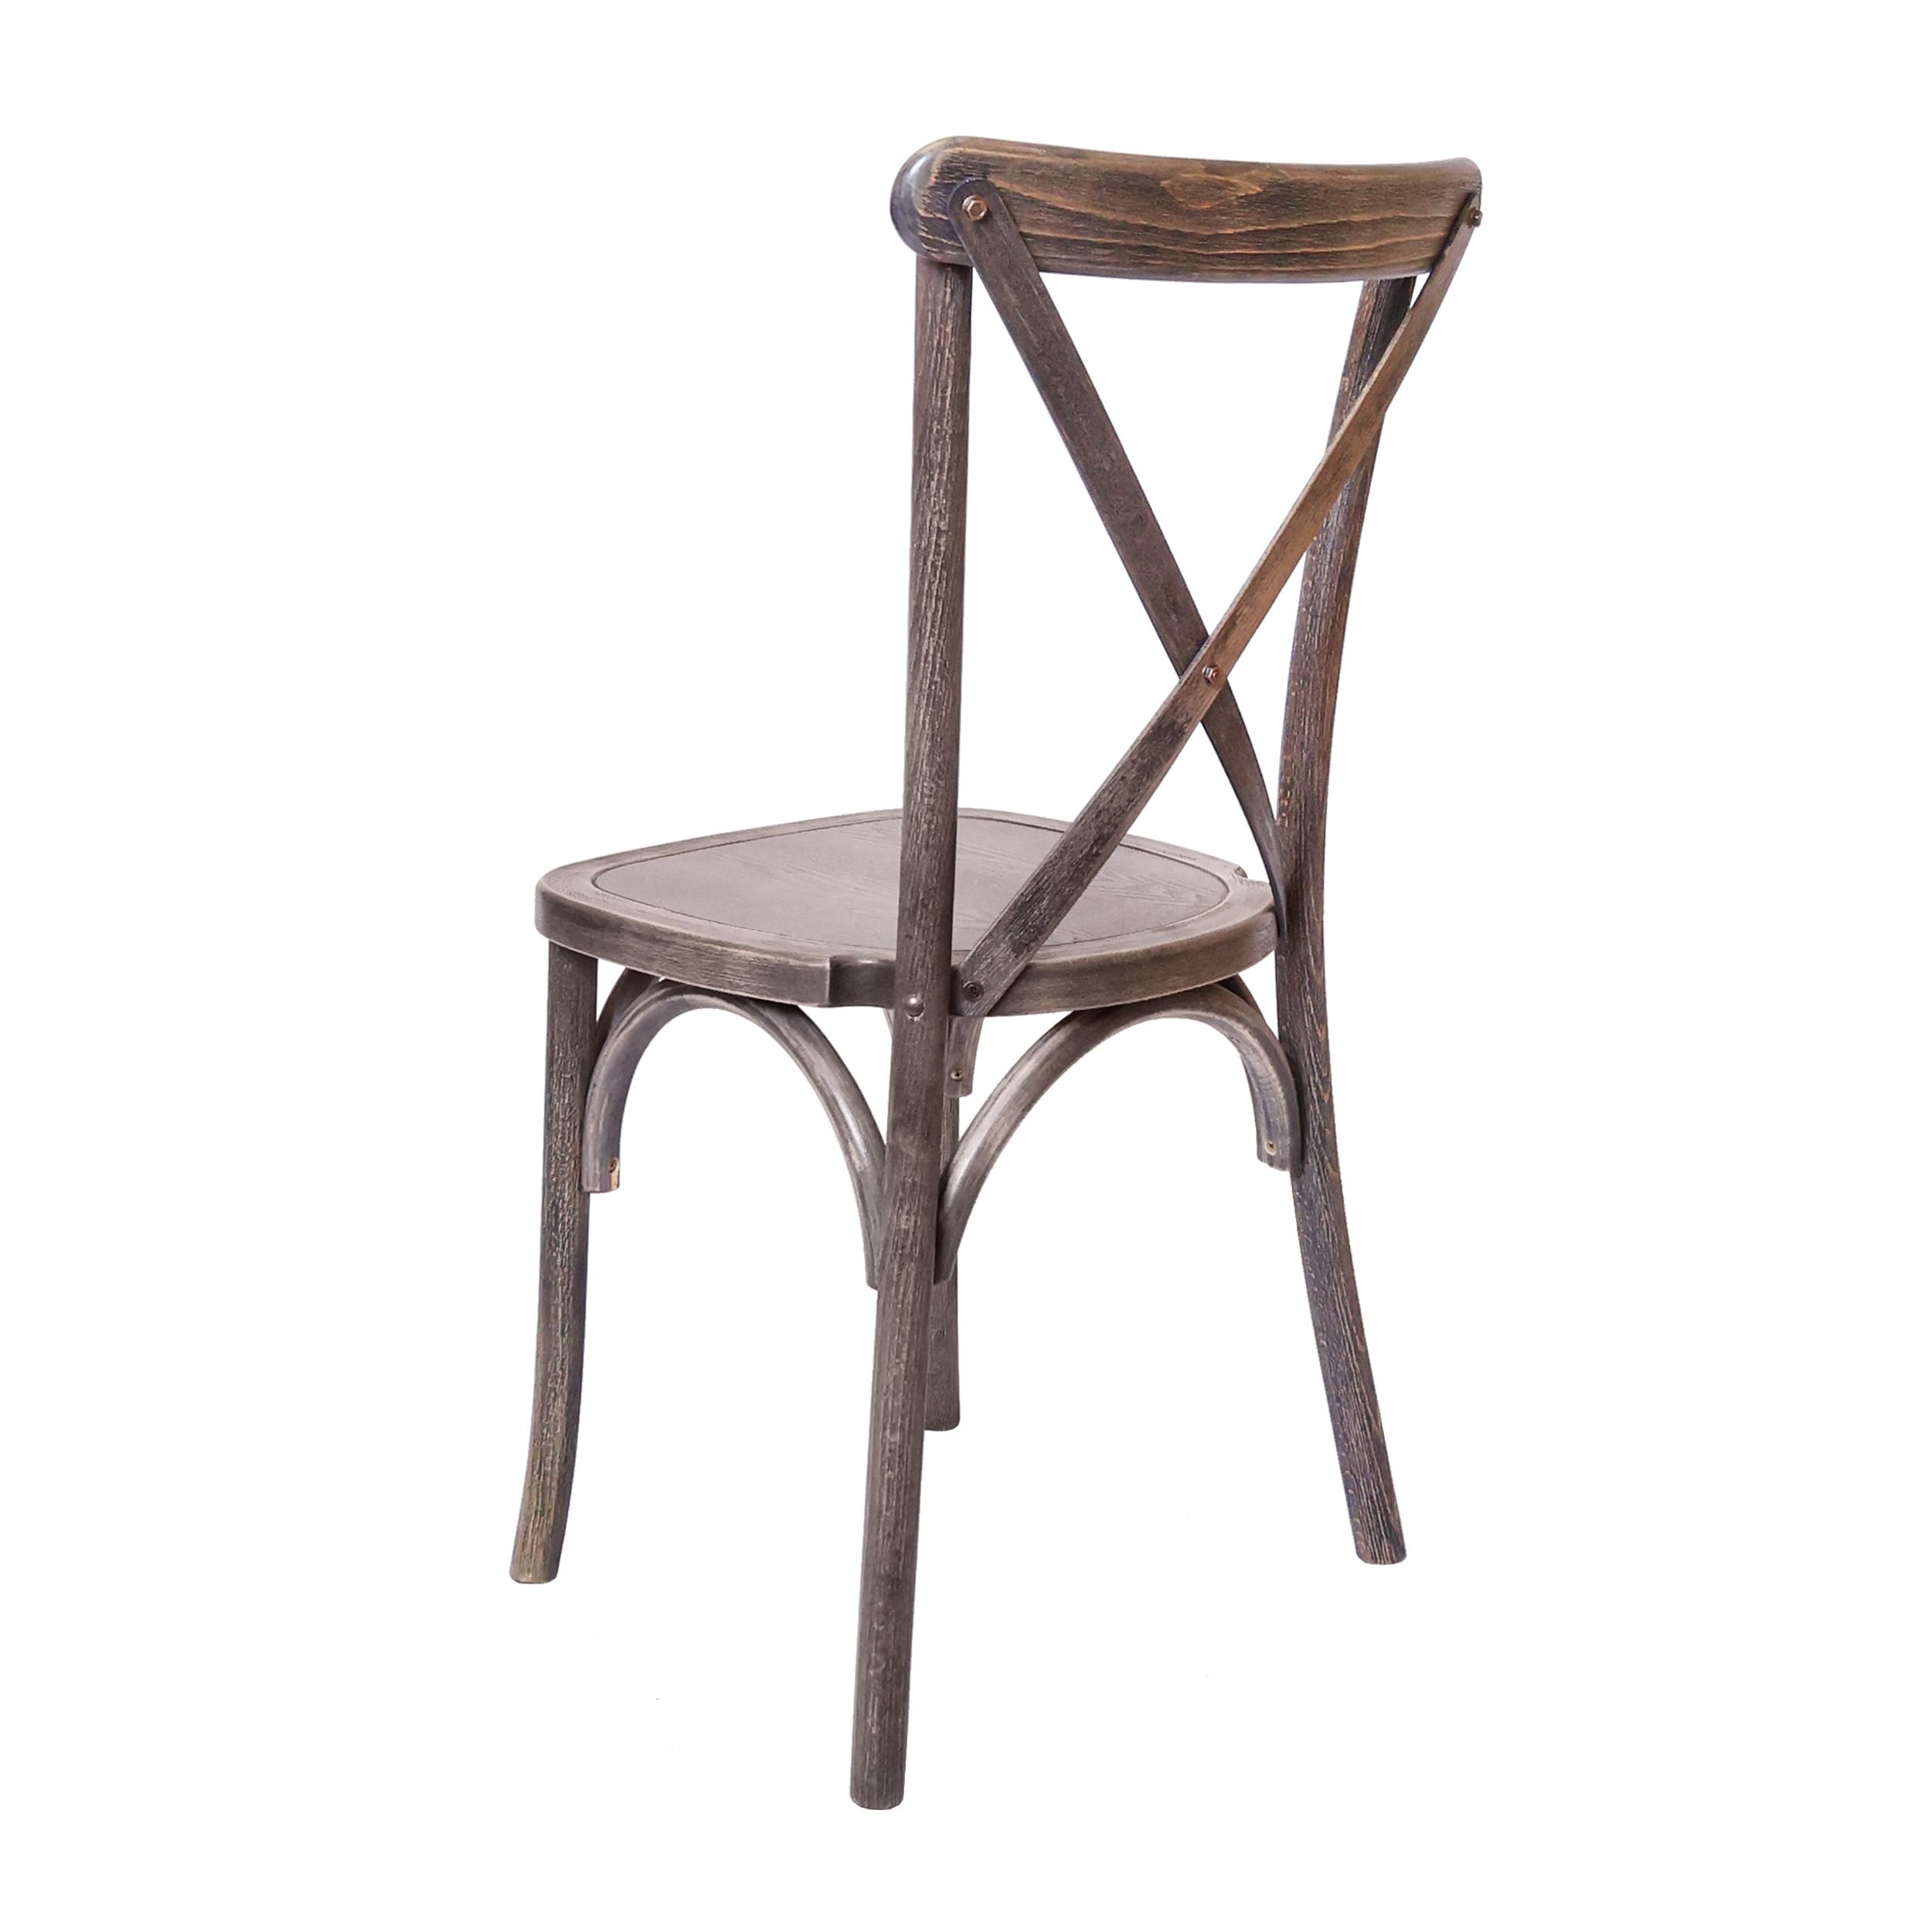 Chair Crossback Wood Fruitwood With Gray Lines Z Series PO 404 CXWF 404 ZG T Swatch